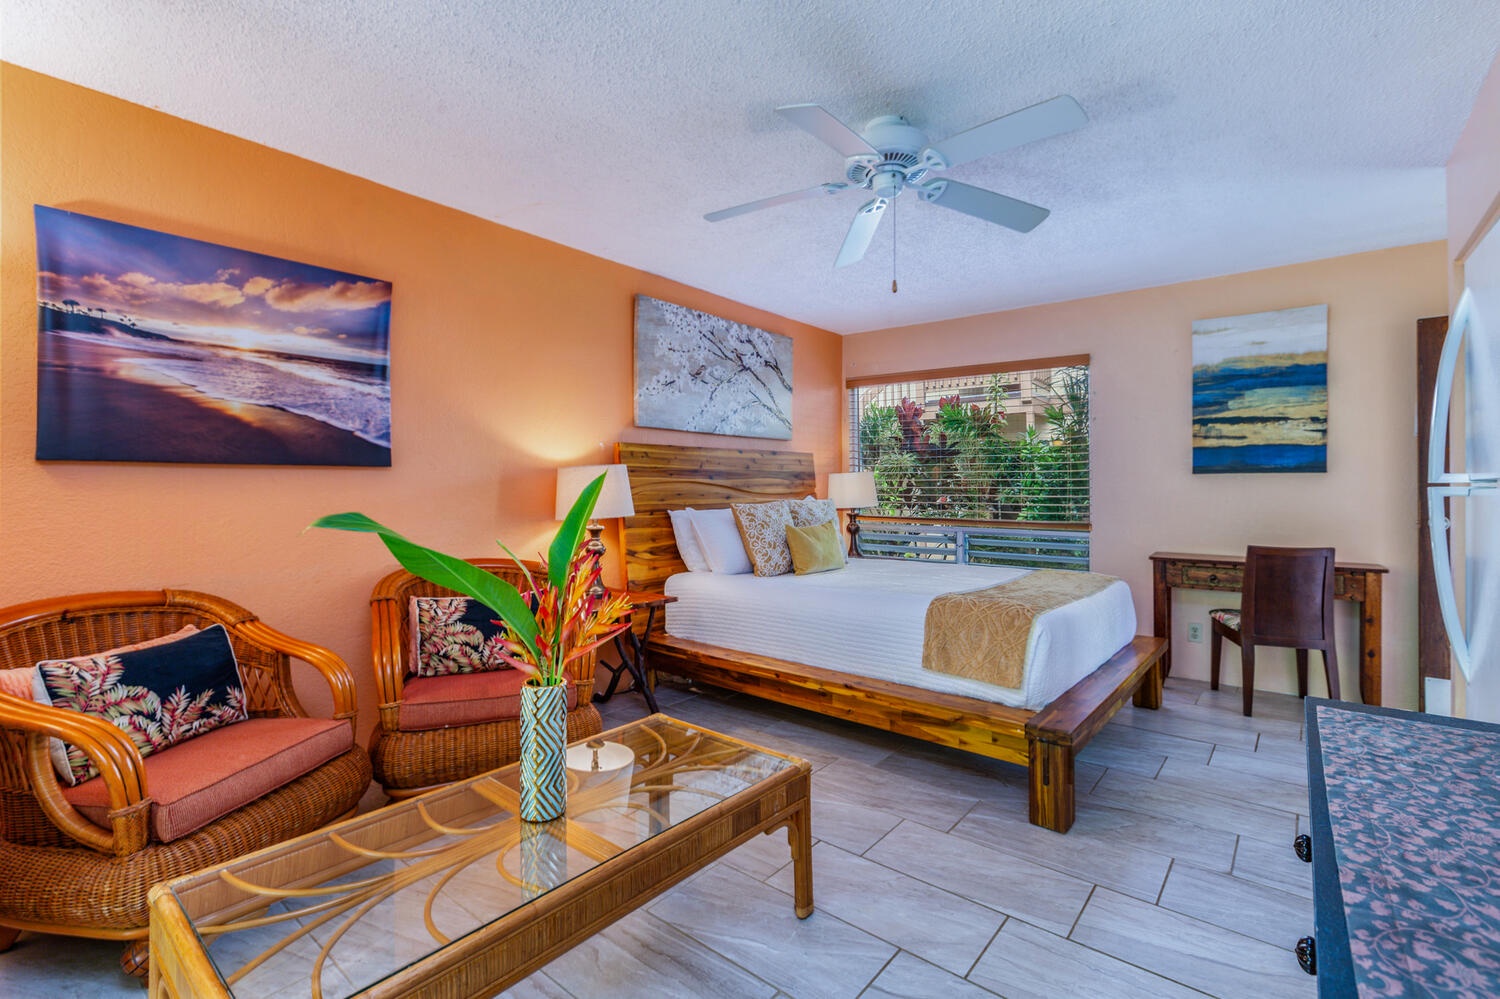 Princeville Vacation Rentals, Hideaway Haven Suite - Unwind in a romantic suite, thoughtfully designed for couples seeking a private and intimate retreat.